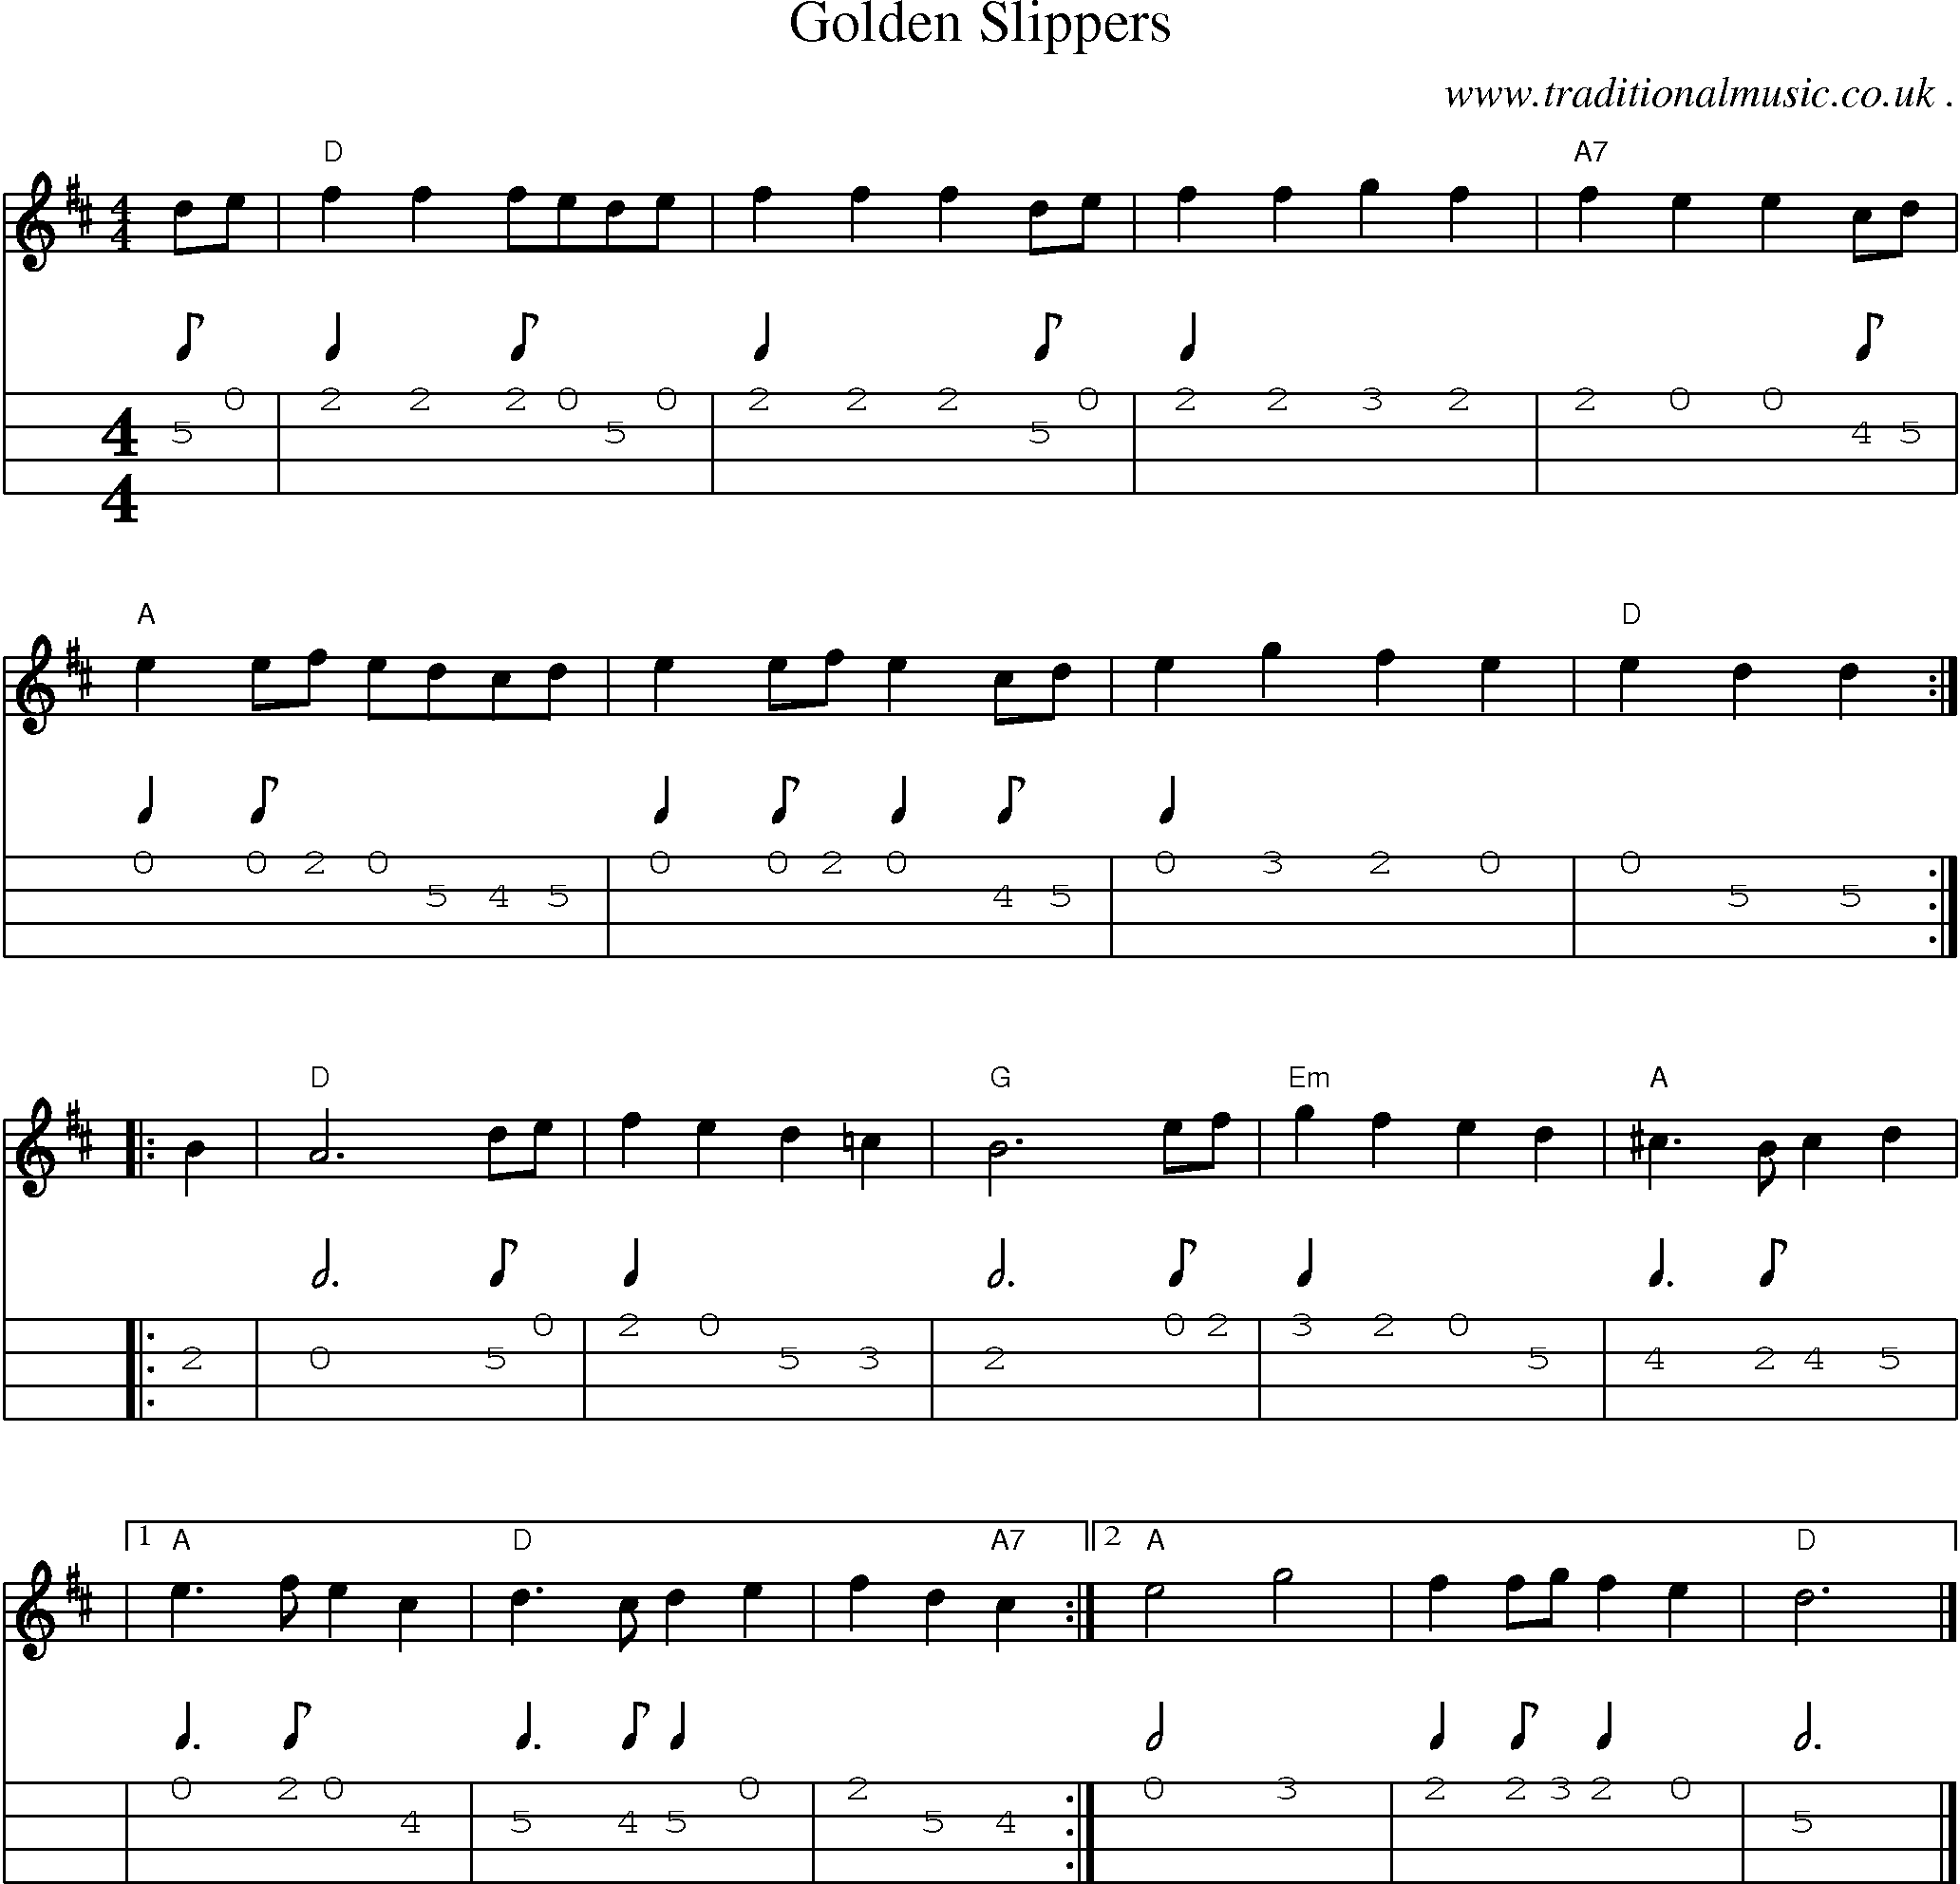 Music Score and Guitar Tabs for Golden Slippers